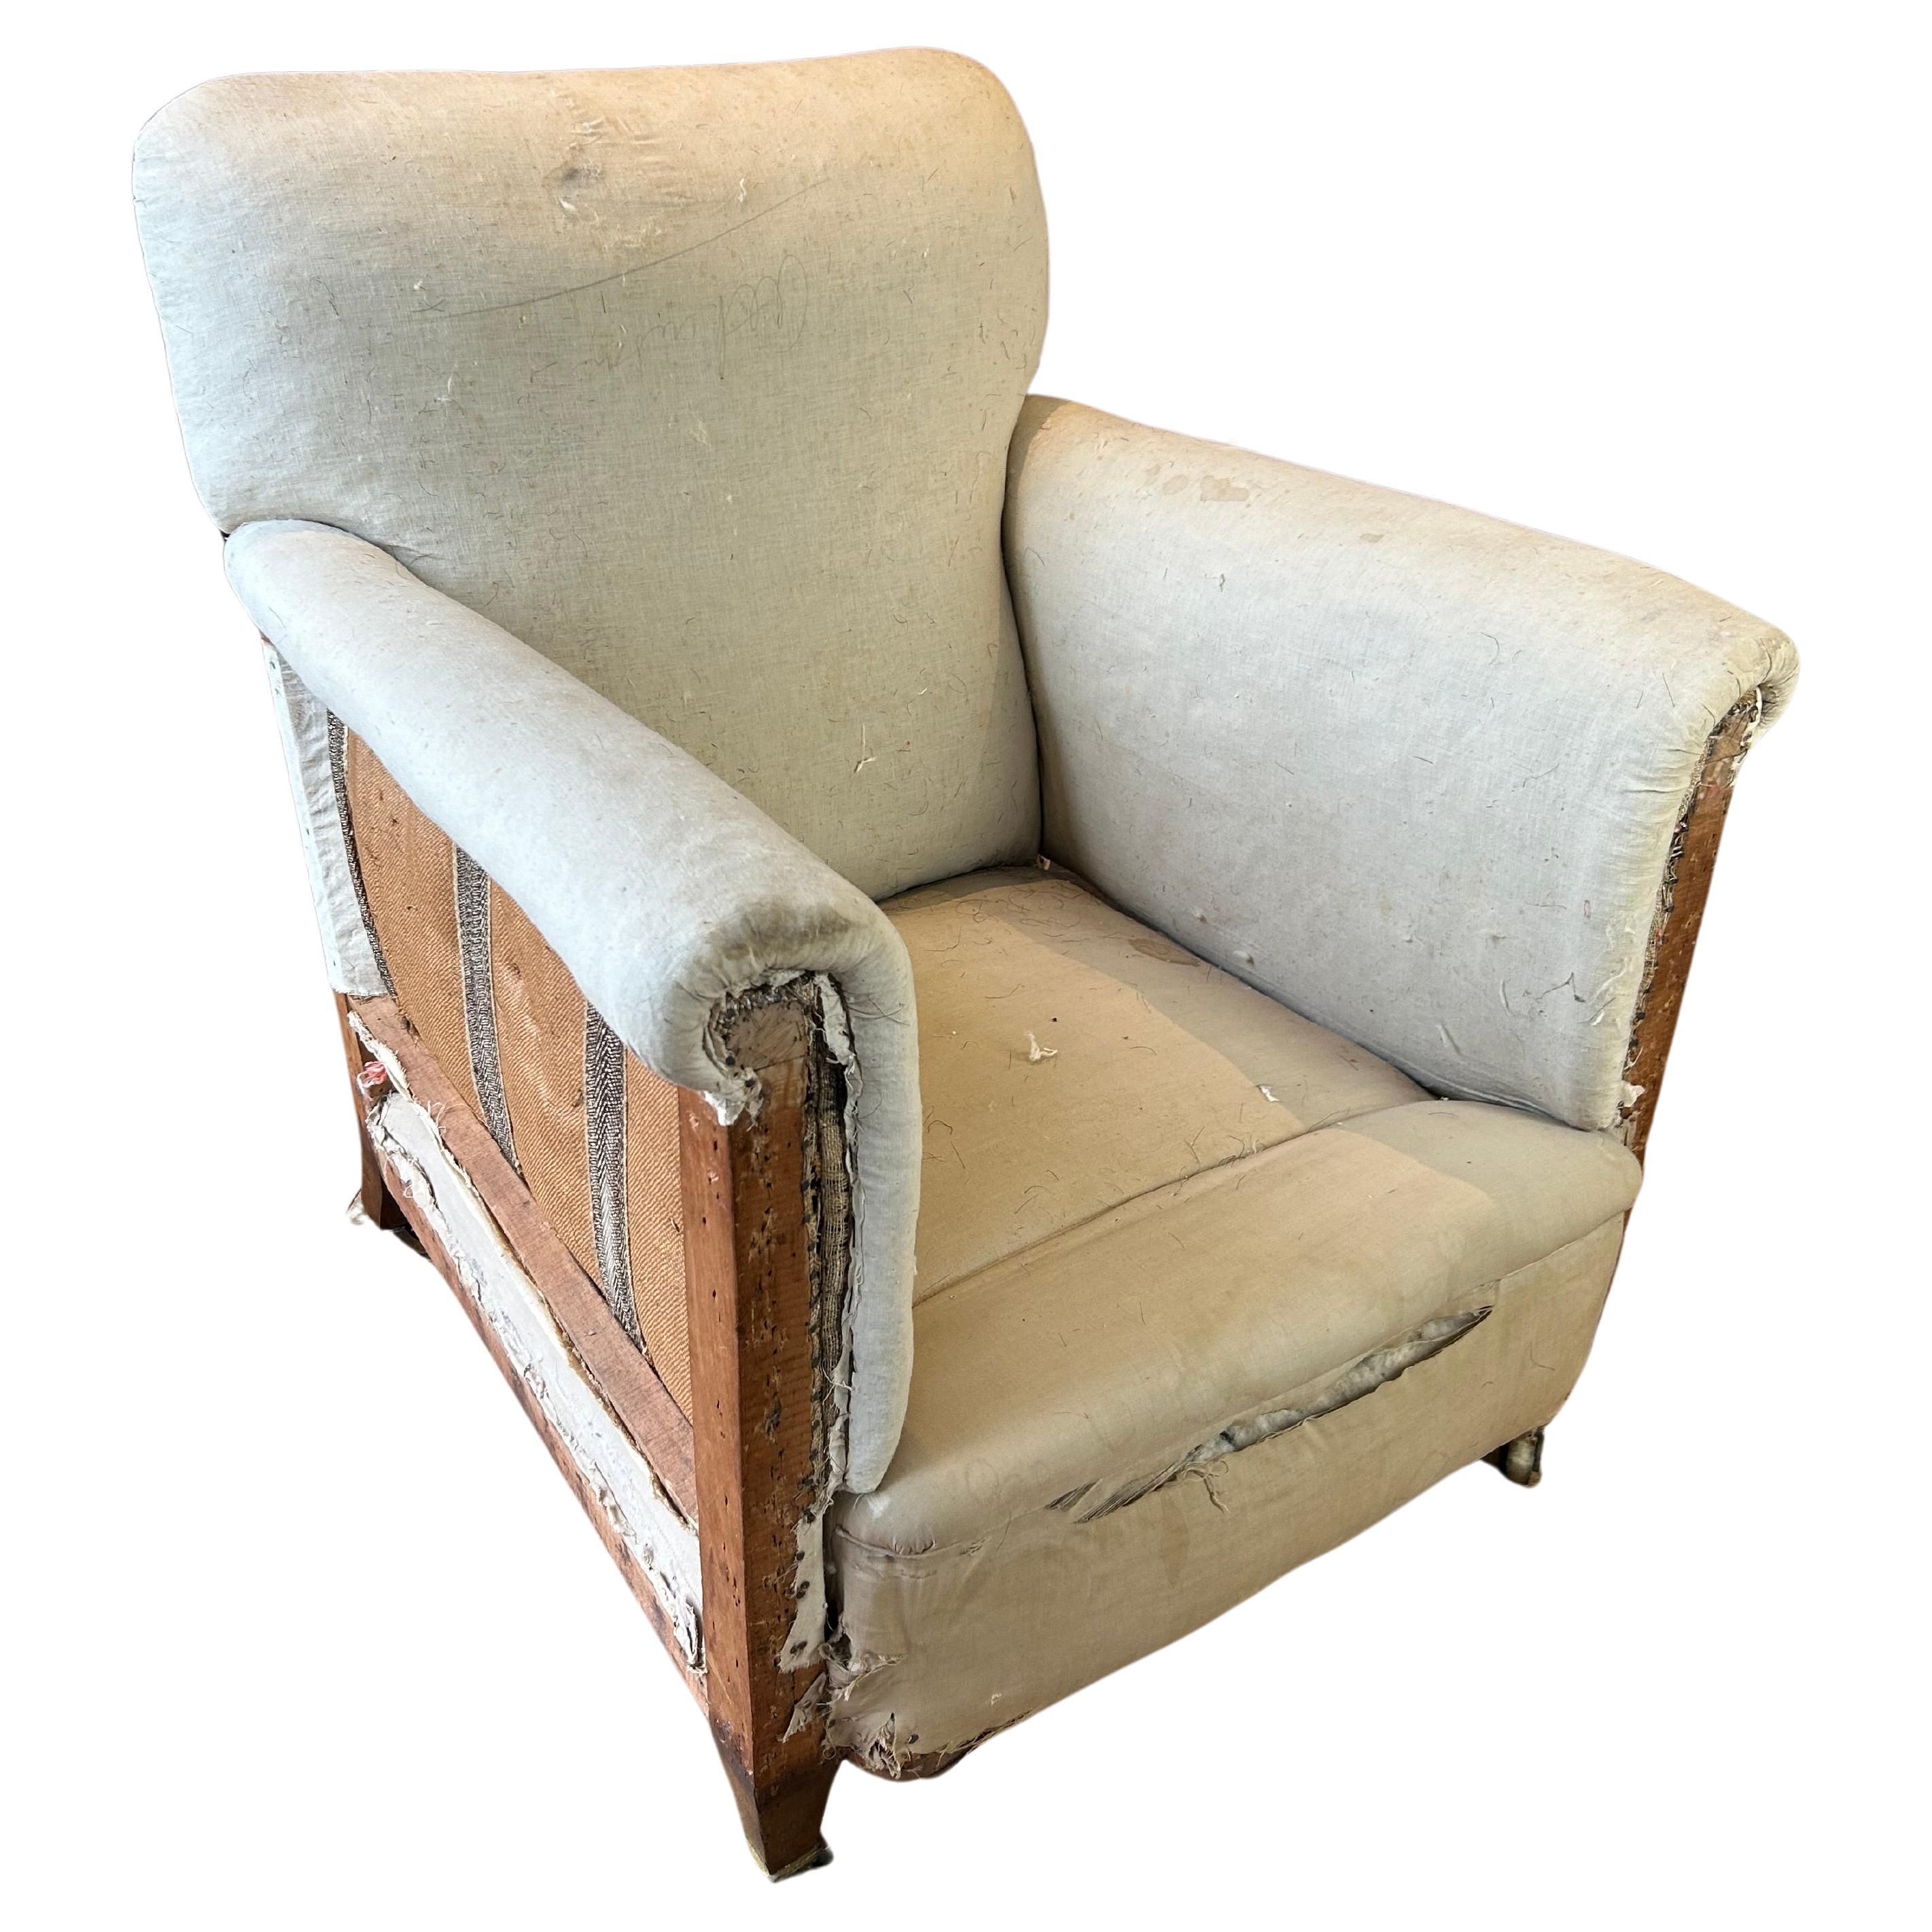 William Birch Stamped Upholstered English Armchair, circa 1890 For Sale